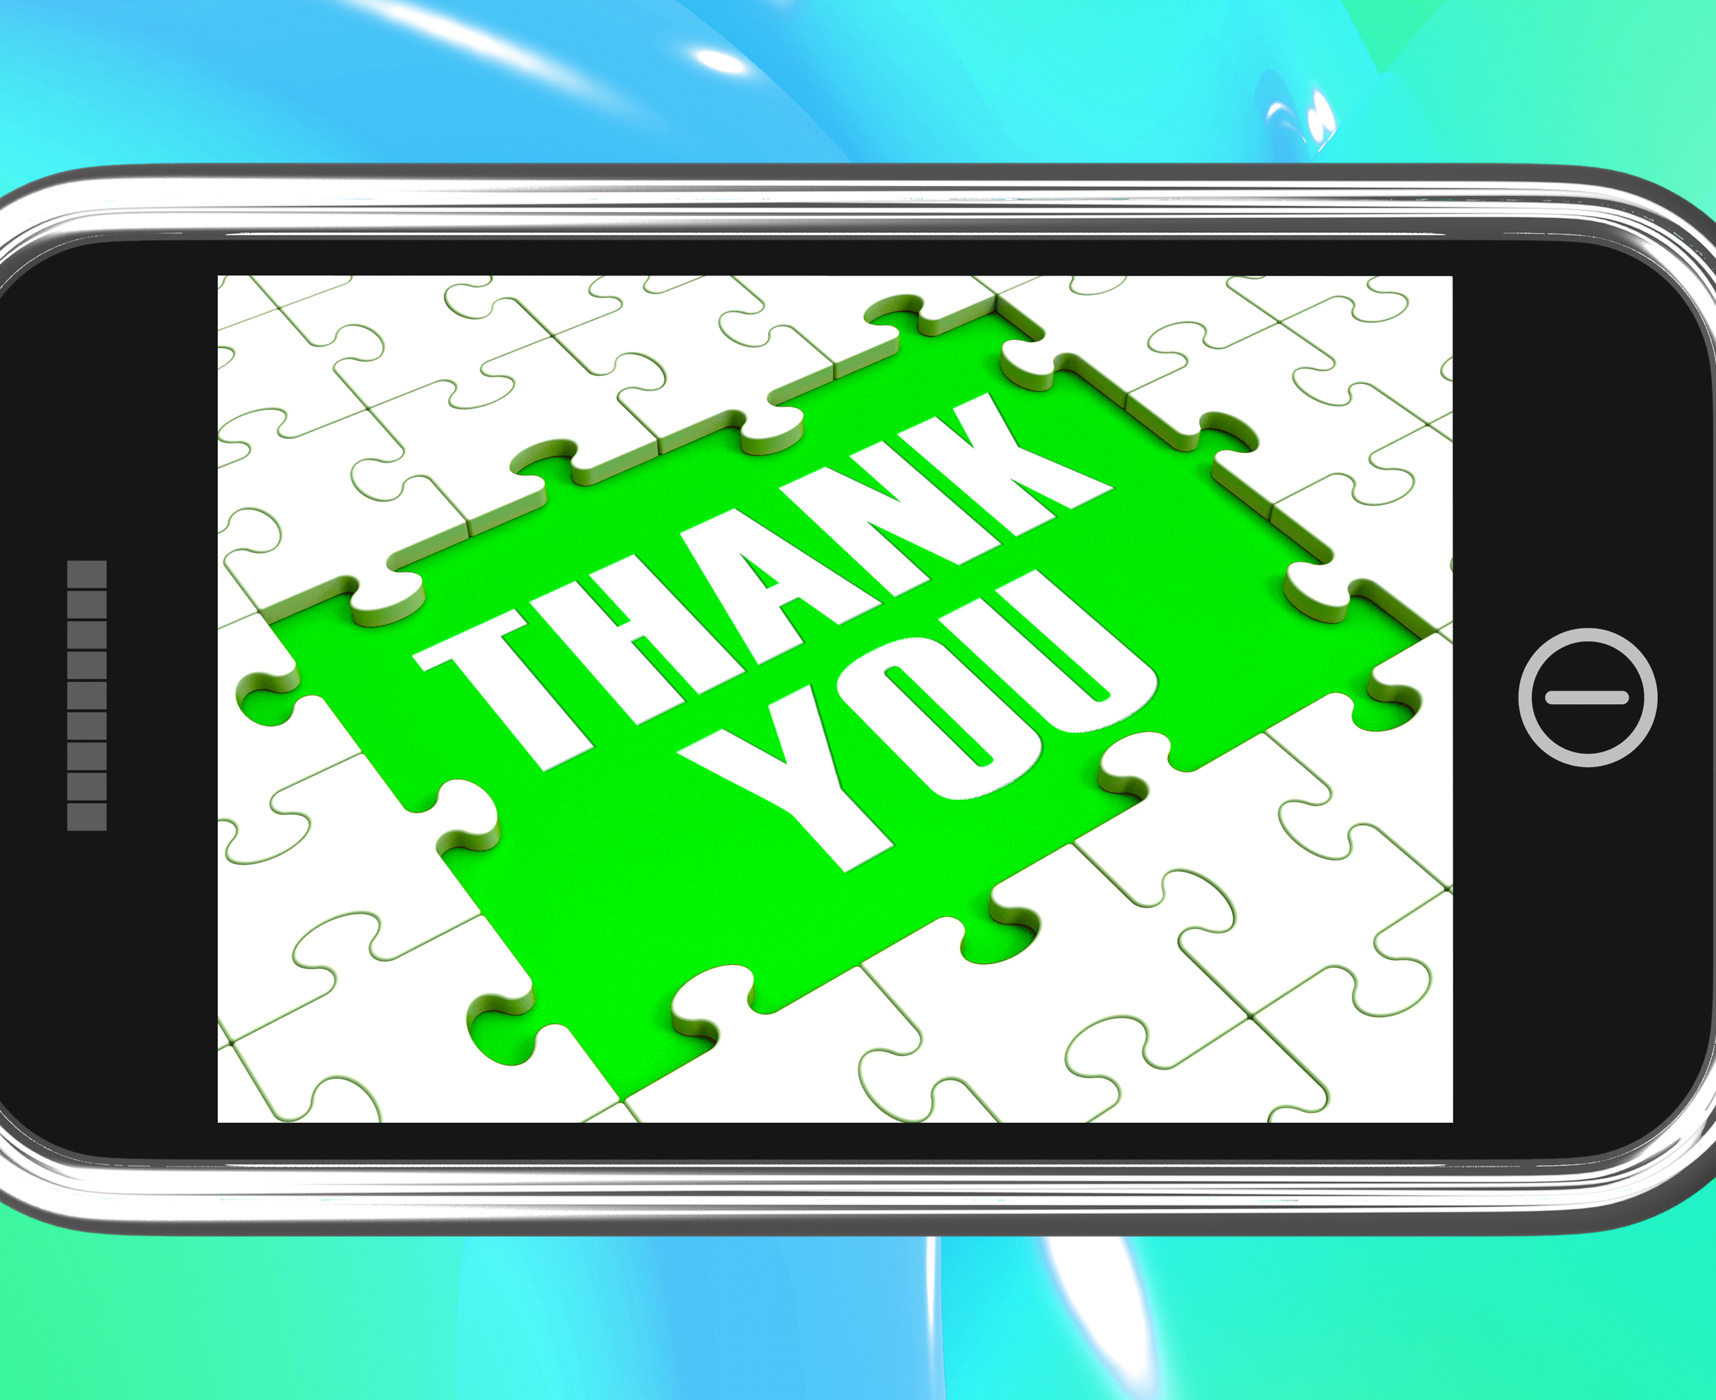 Thank You On Smartphone Shows Gratitude Texts And Appreciation, Appreciate, Smartphone, Web, Thankyou, HQ Photo